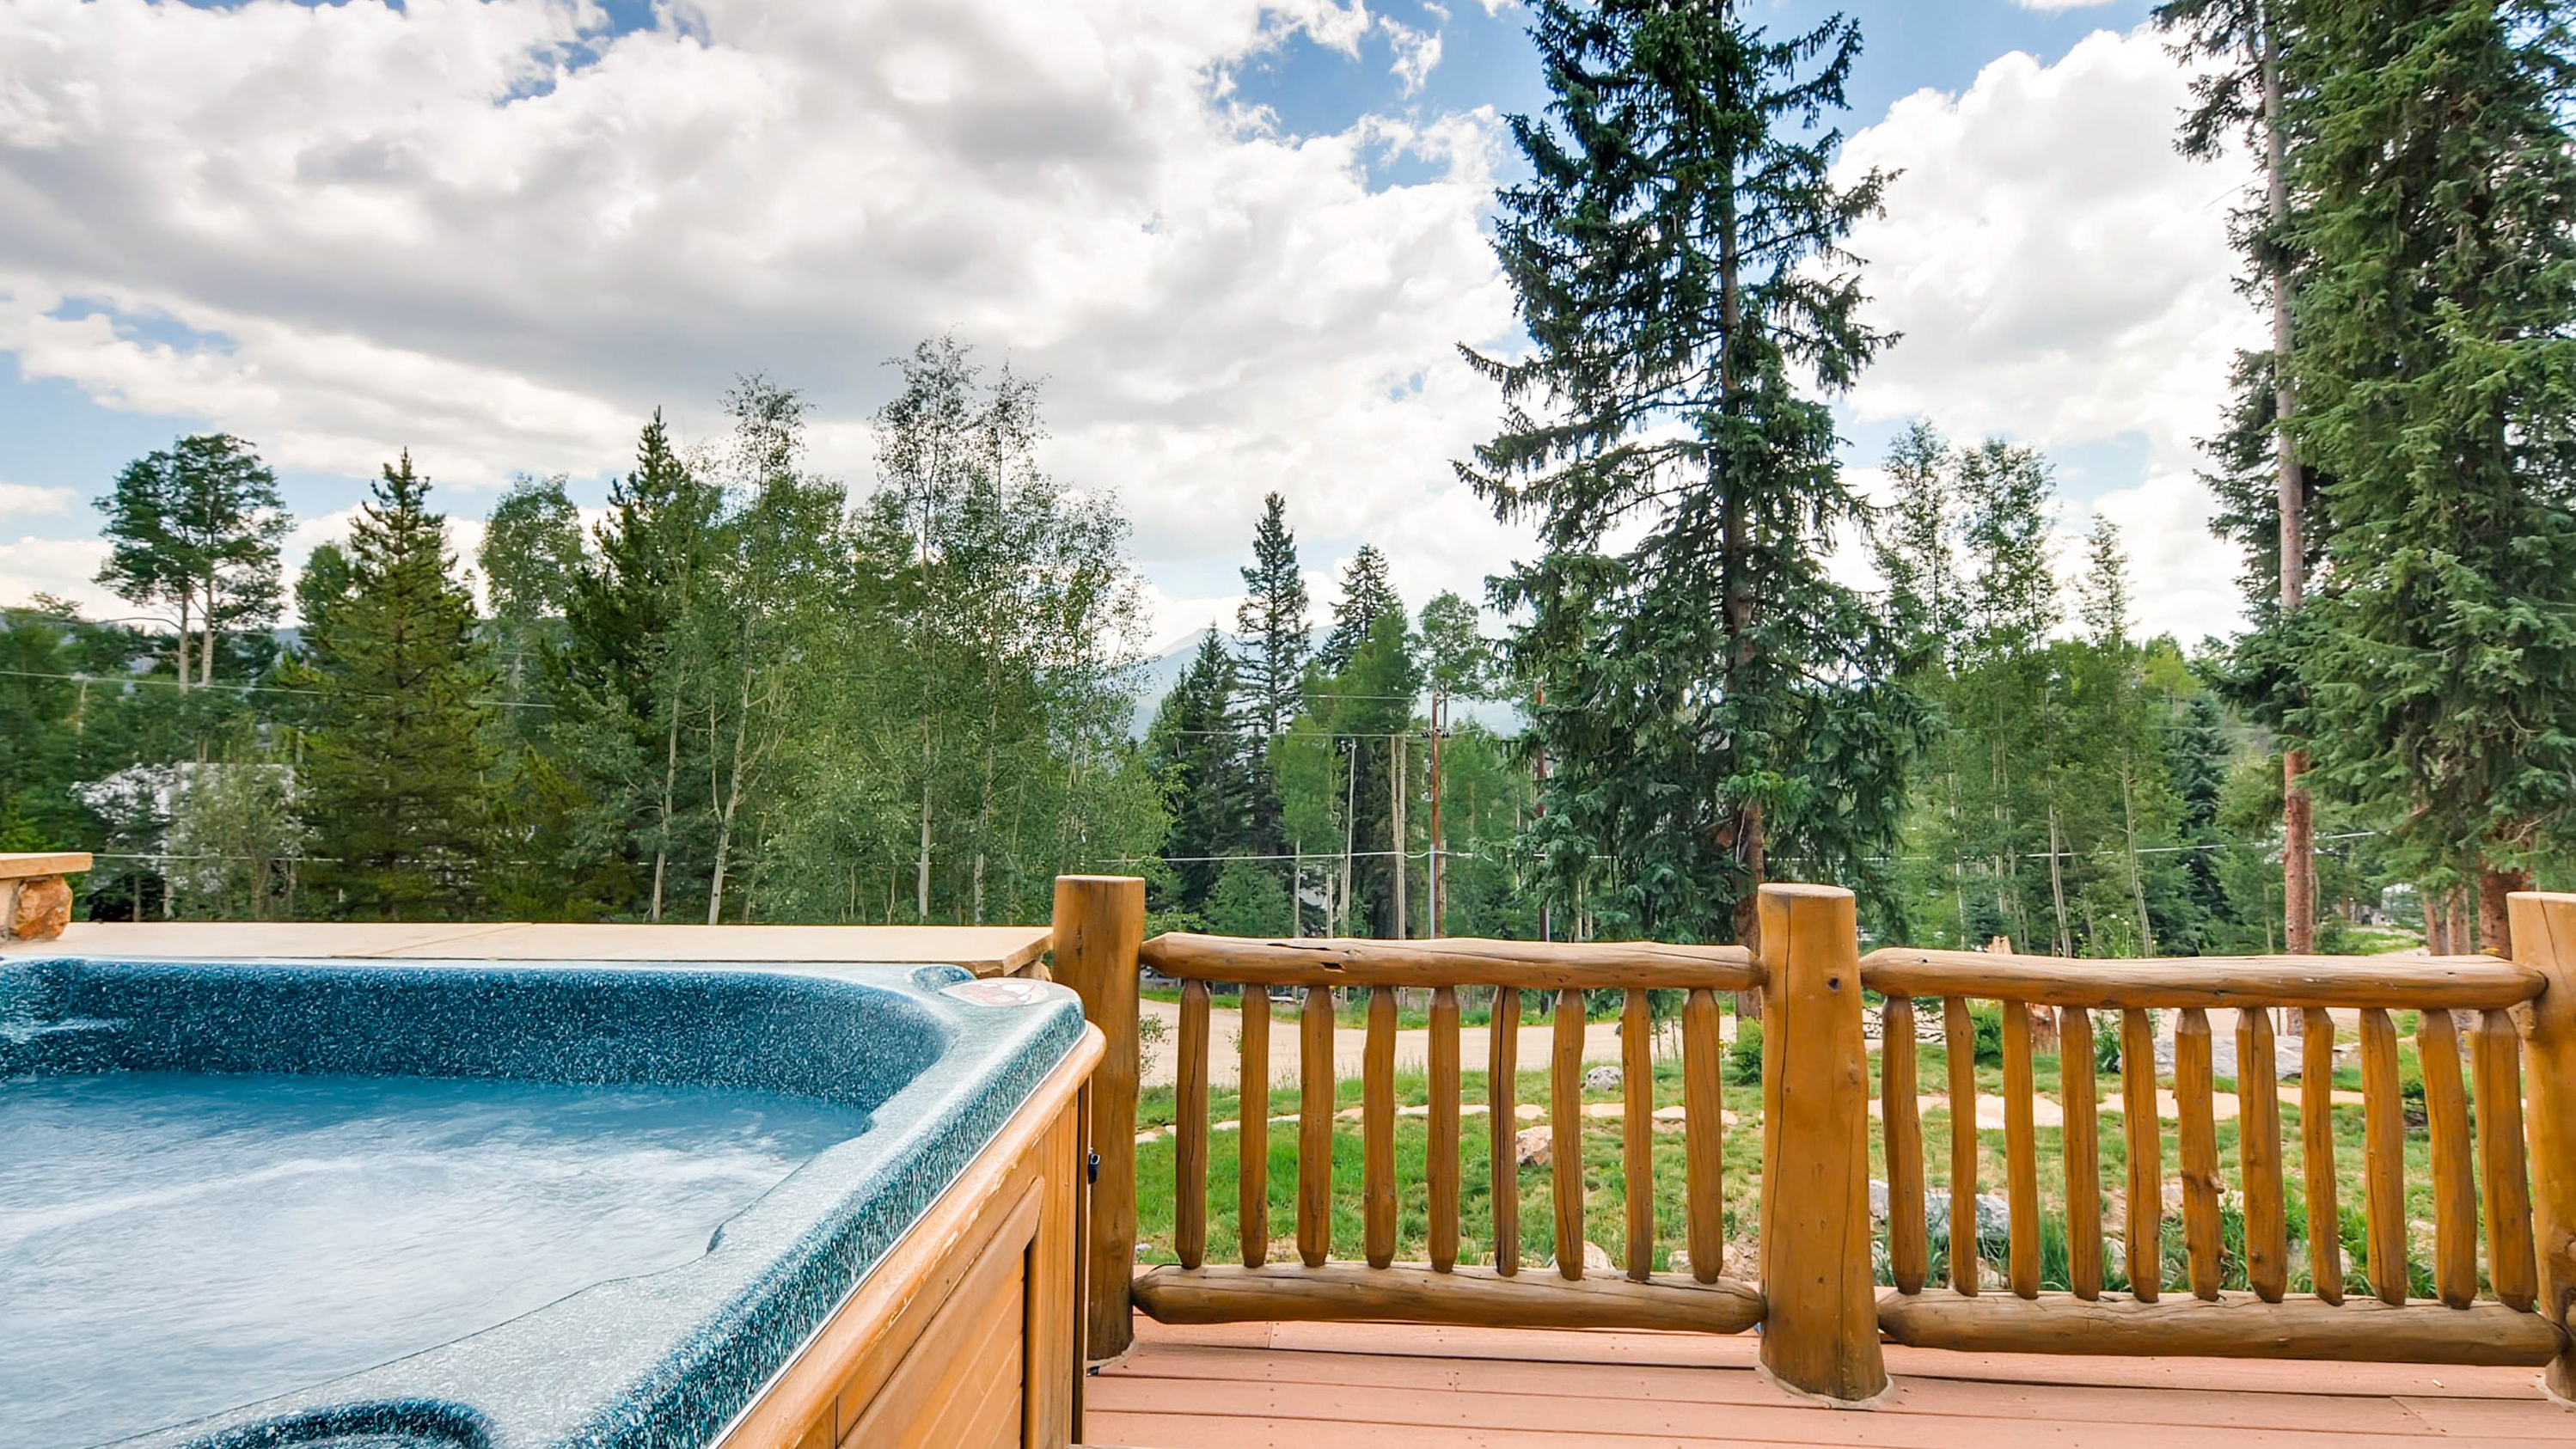 Enjoy your private hot tub on the deck